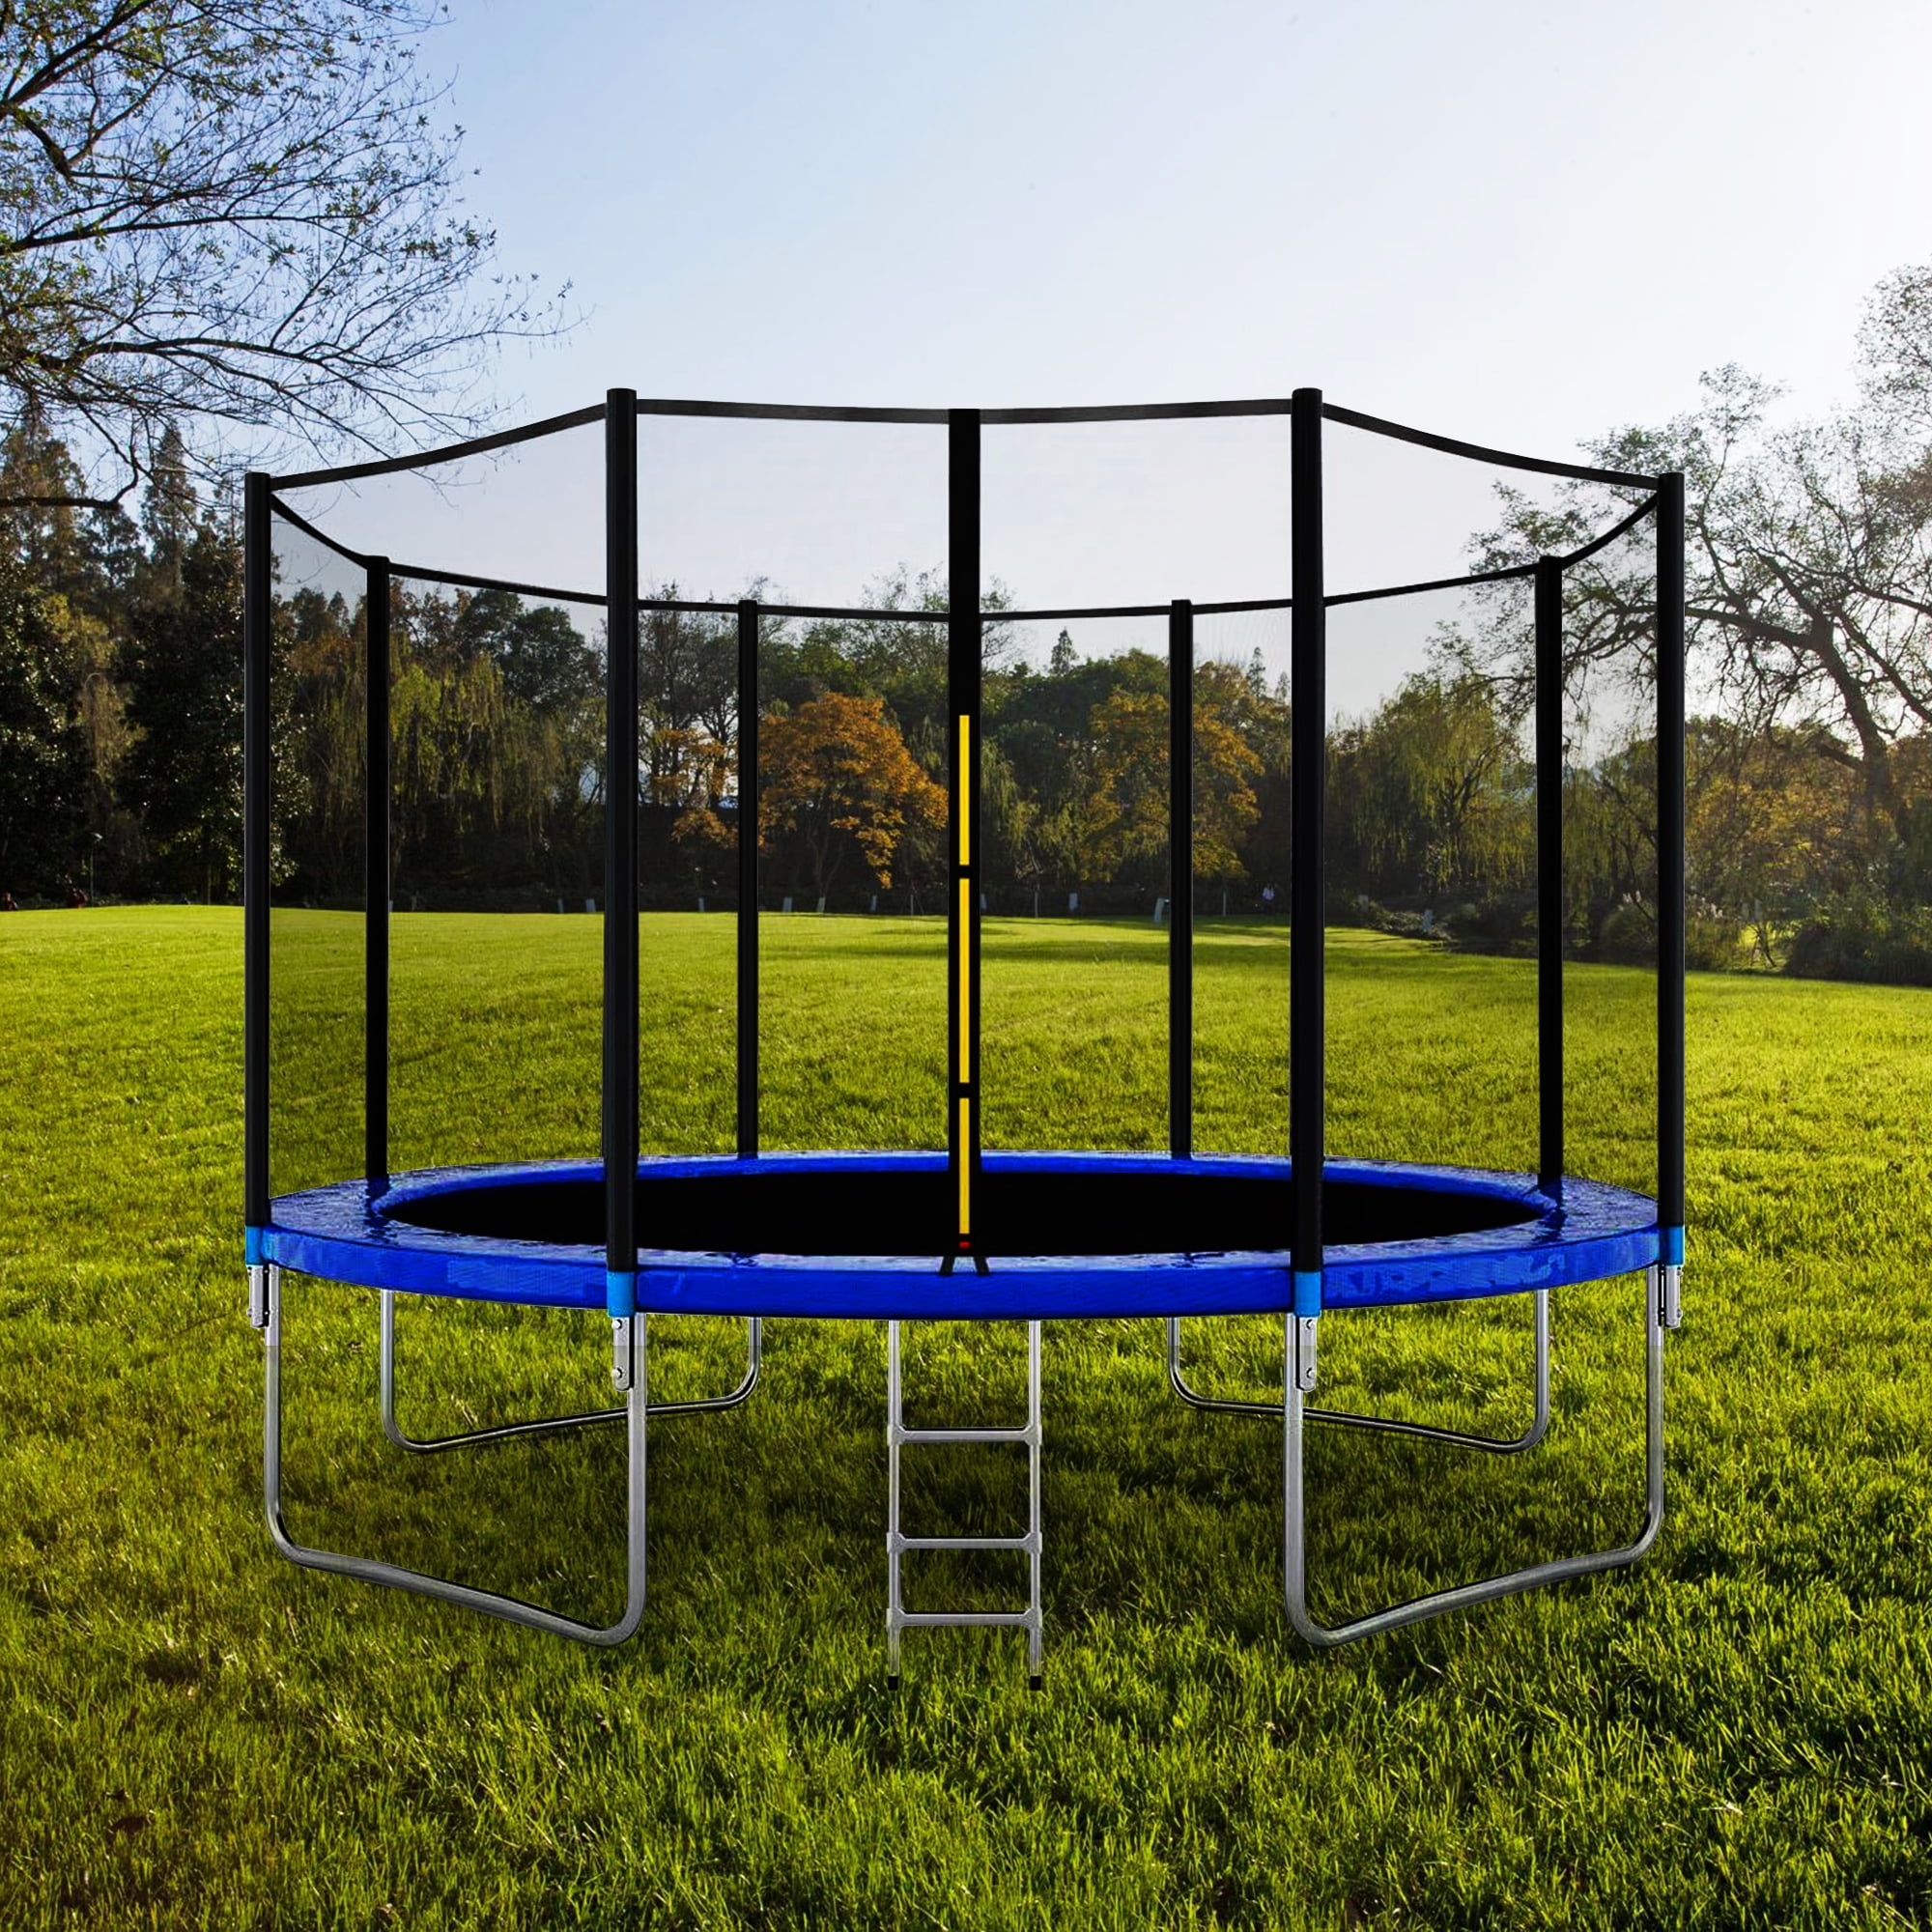 12-Foot Kids Trampoline for Backyard, Outdoor Trampoline with Safety Enclosure Net, Steel Tube, Circular Trampolines for Adults Kids, Family Jumping and Ladder, Kids Round Trampoline, Q17168